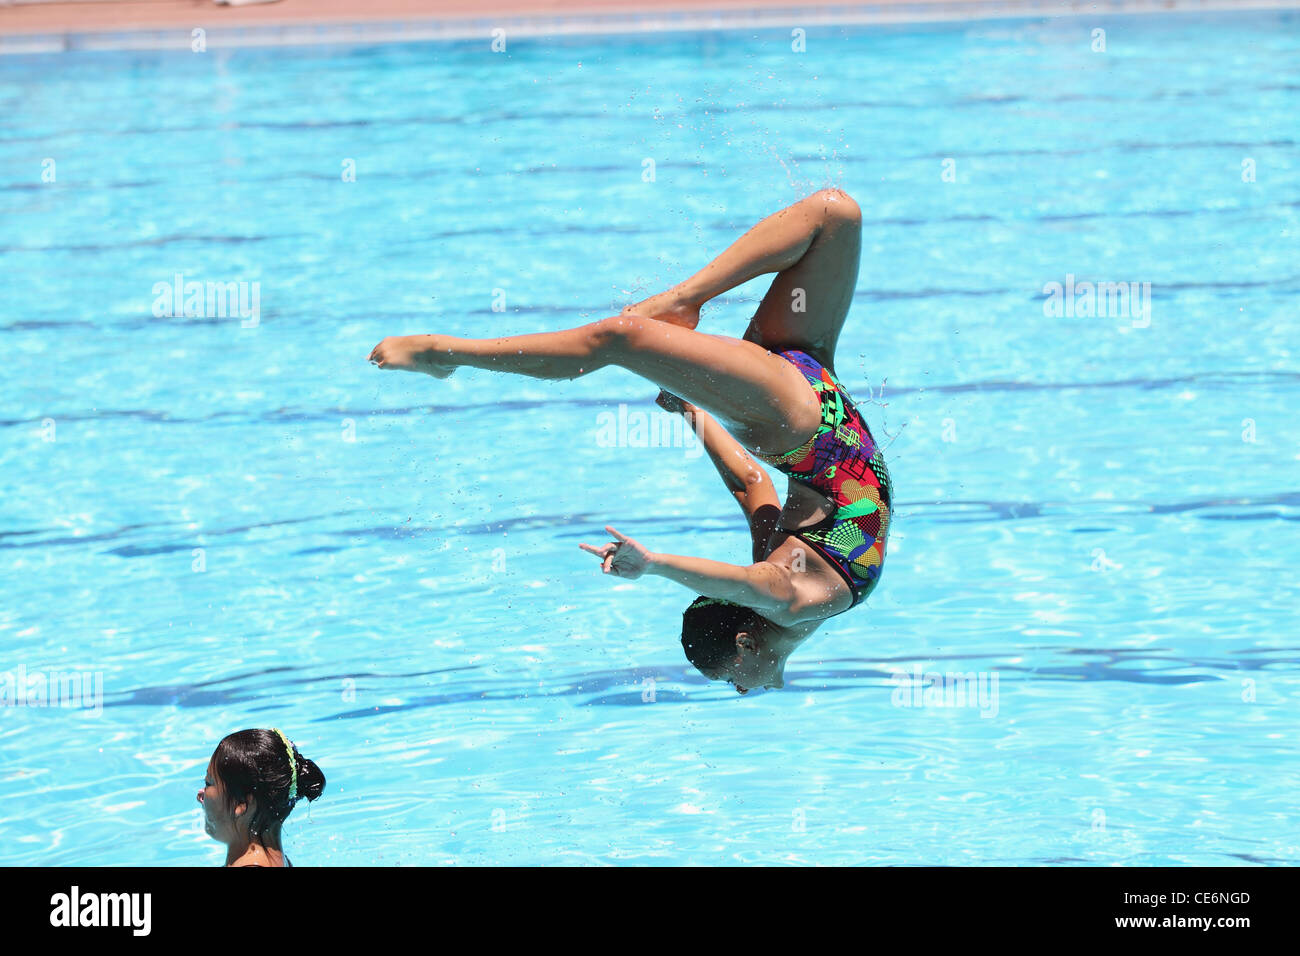 Swimmers Performing, Agility Stock Photo